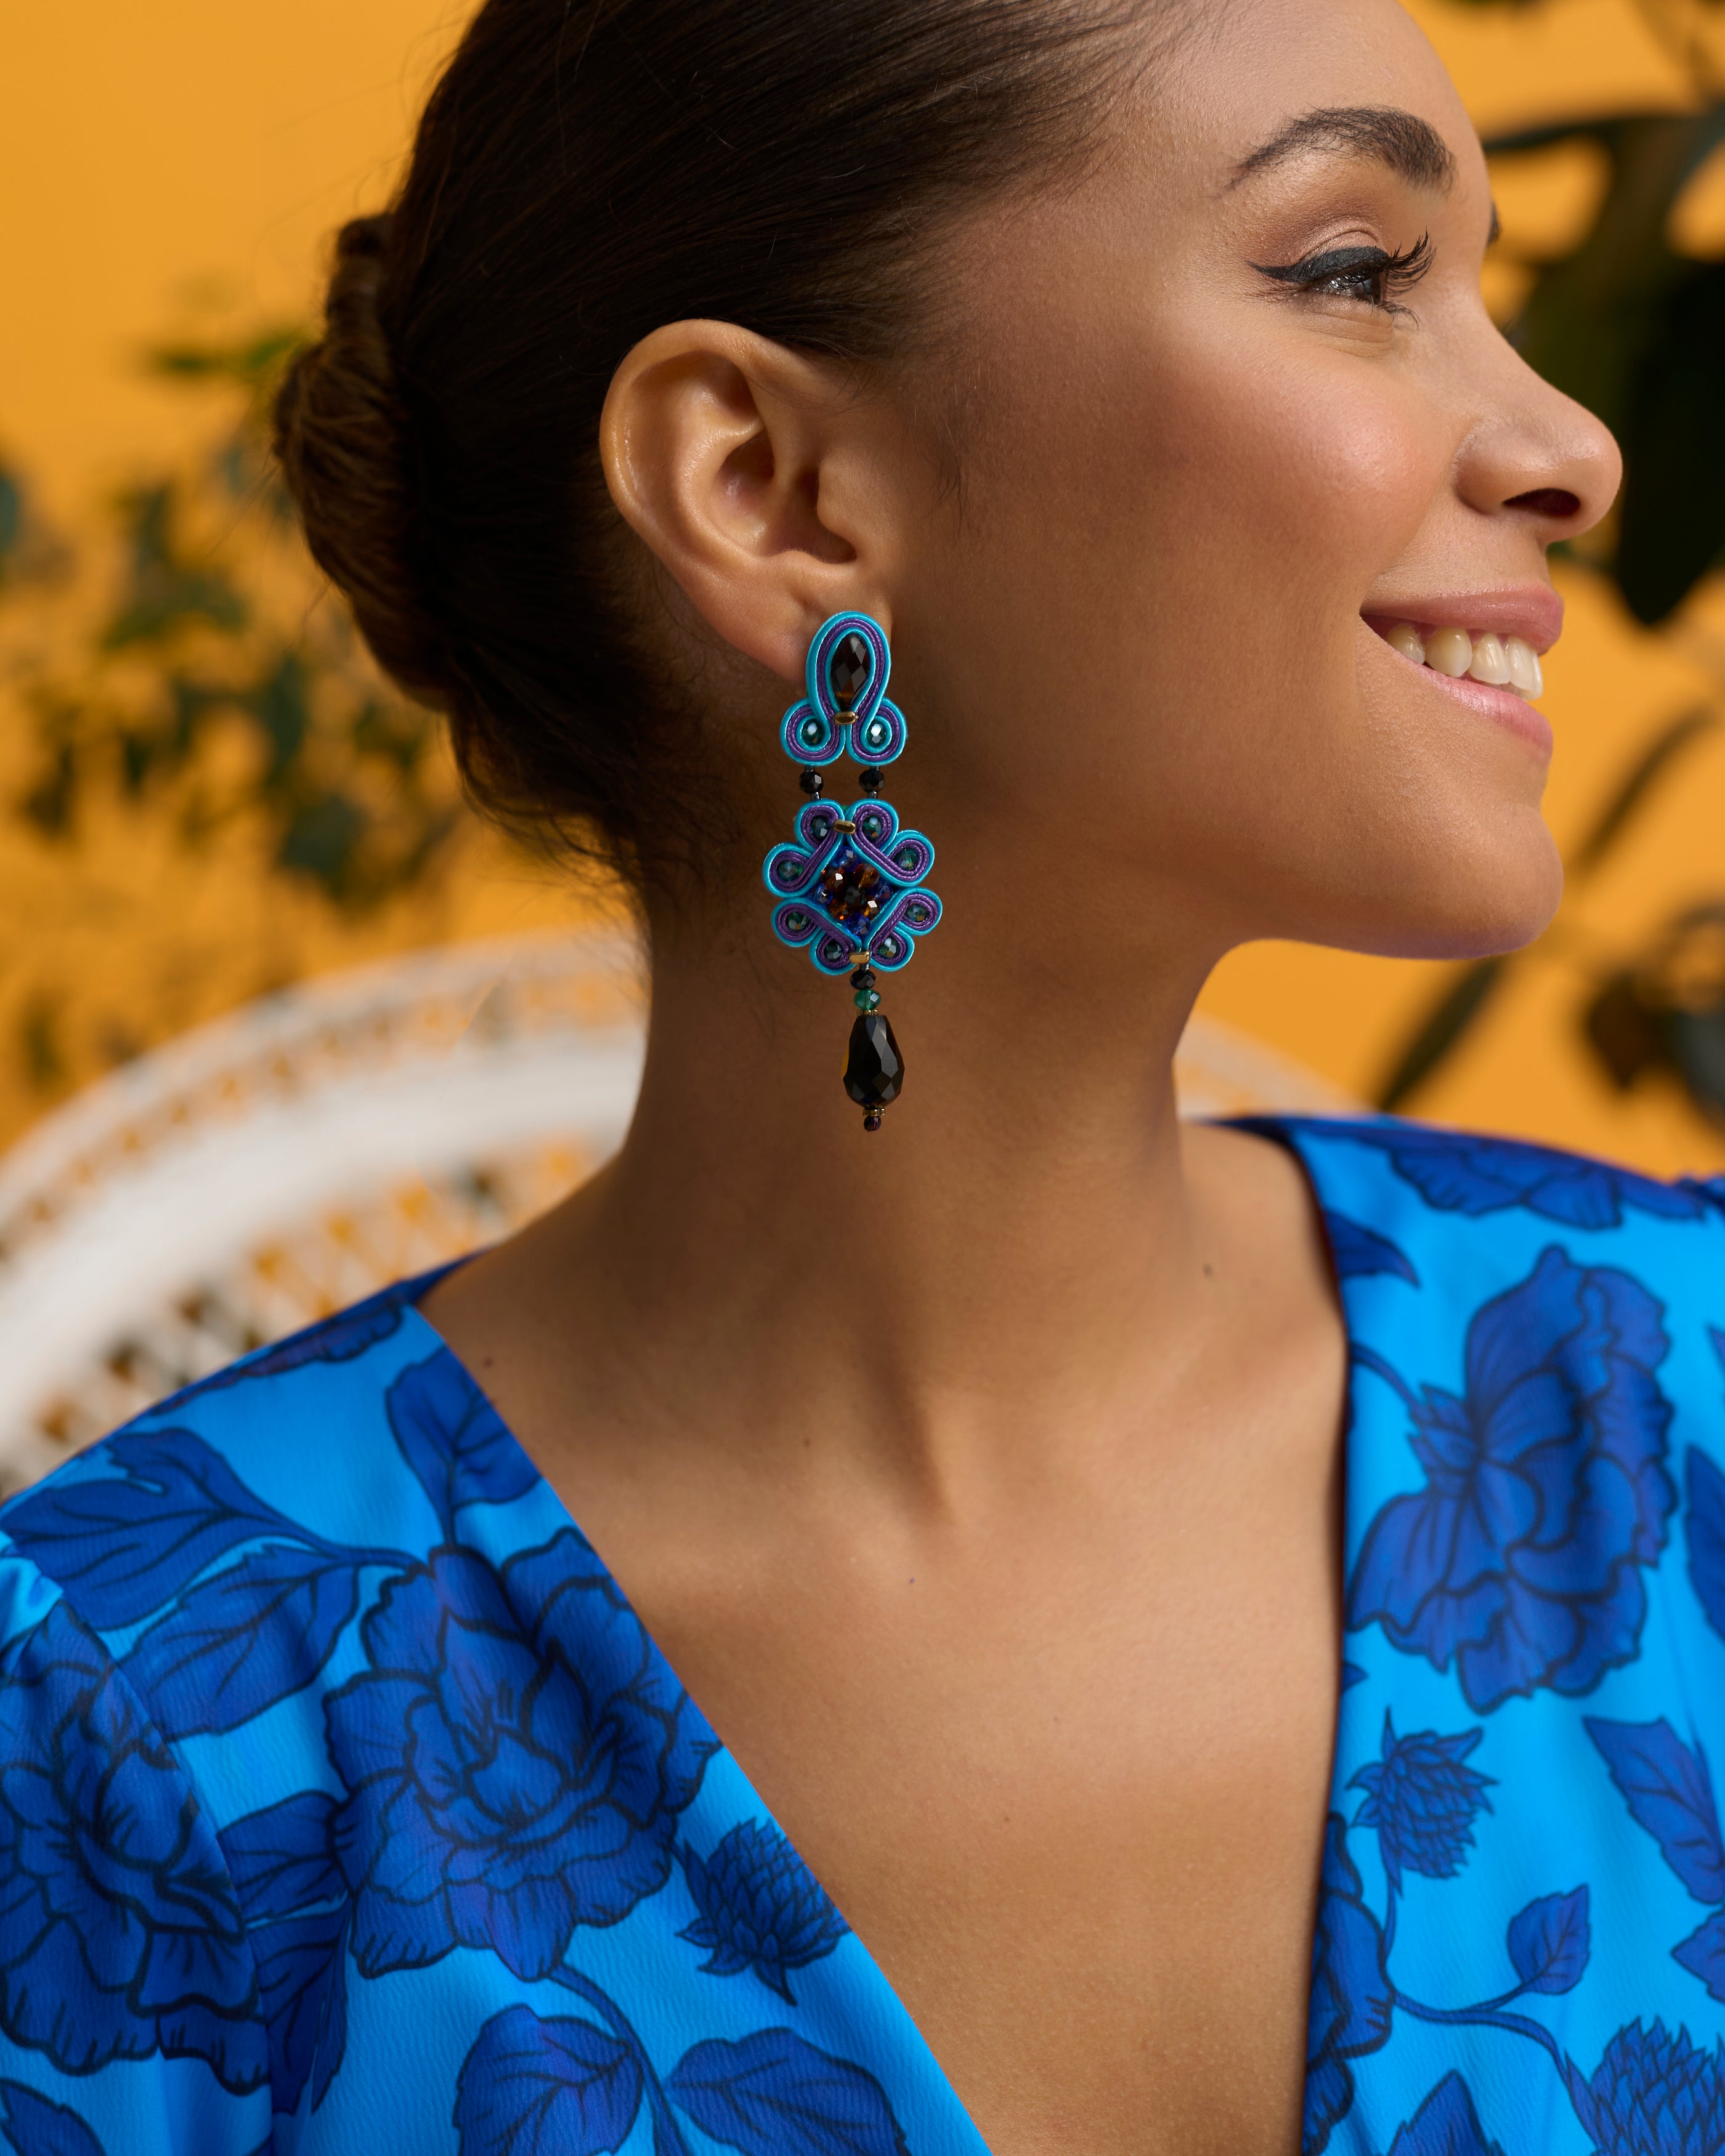 Saturday Violette Earrings by Musula